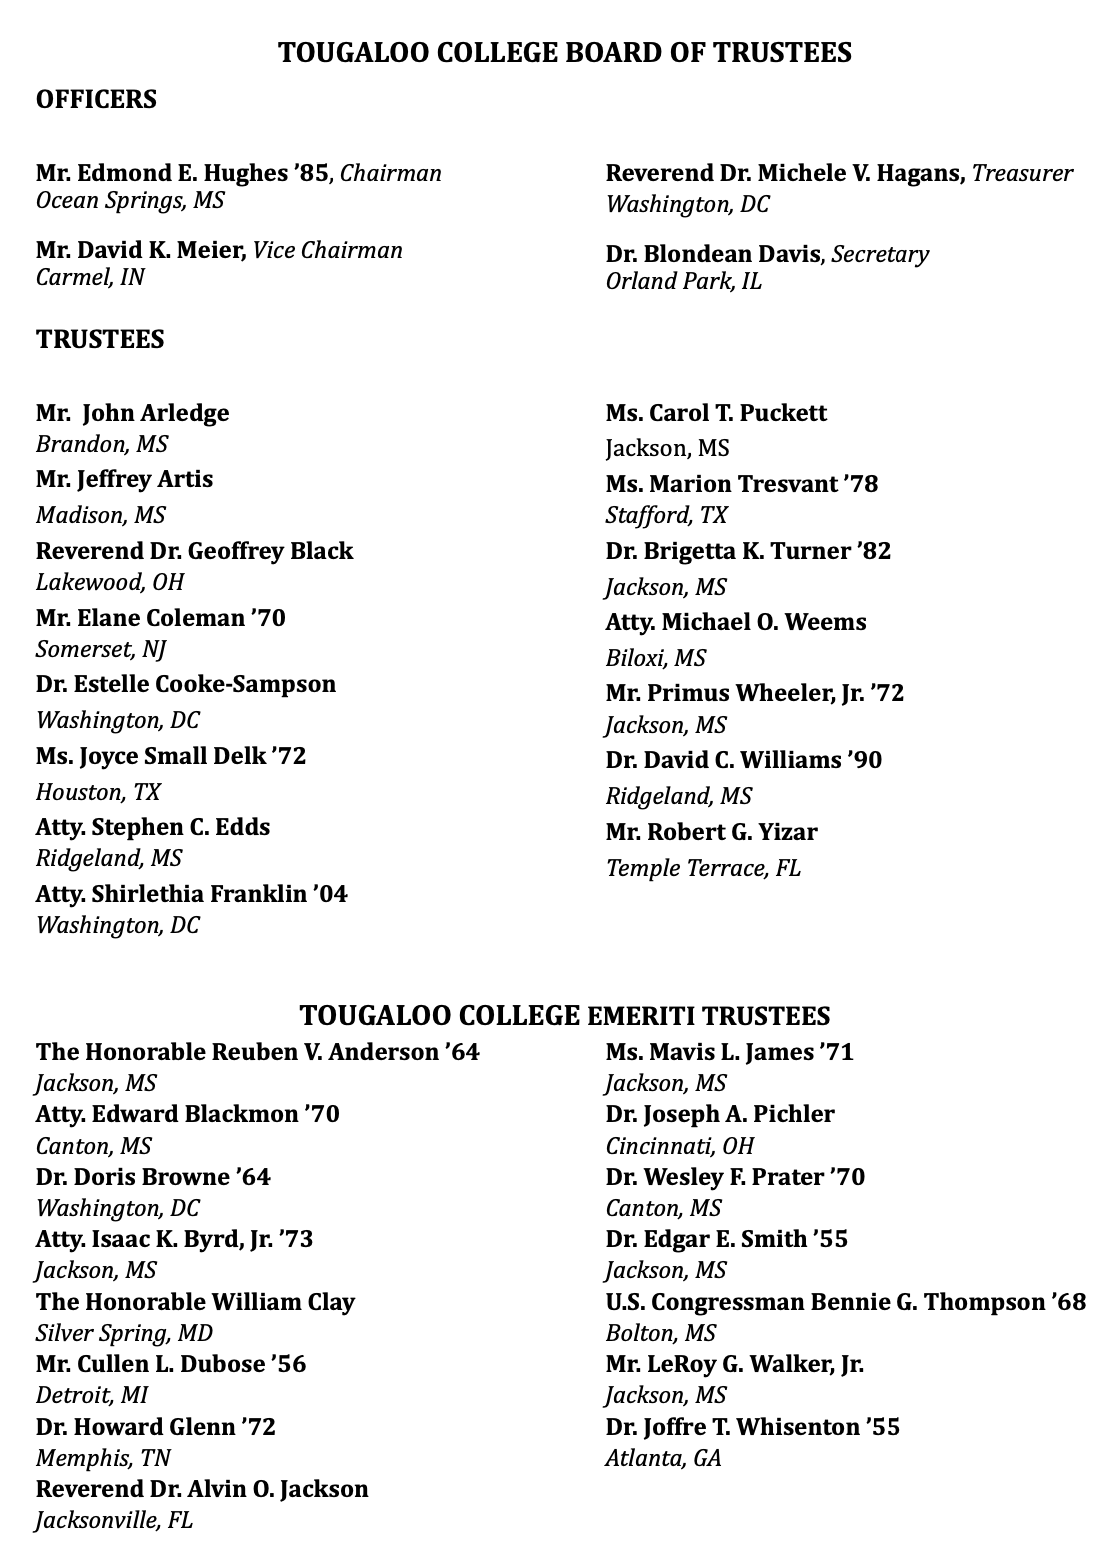 List of Alumni at Tougaloo College